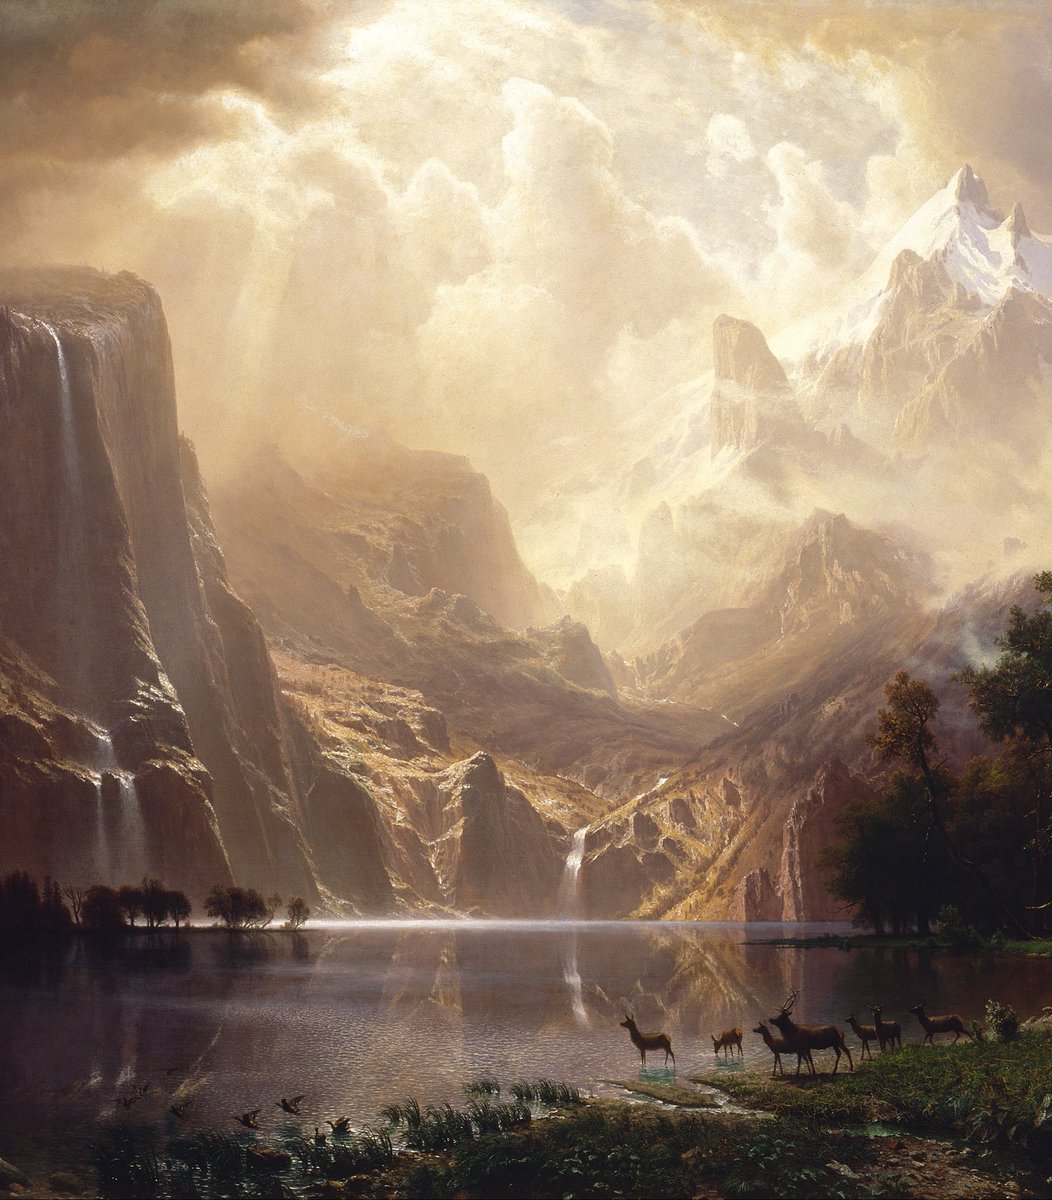 A brief introduction to Albert Bierstadt, one of the greatest landscape painters who ever lived...